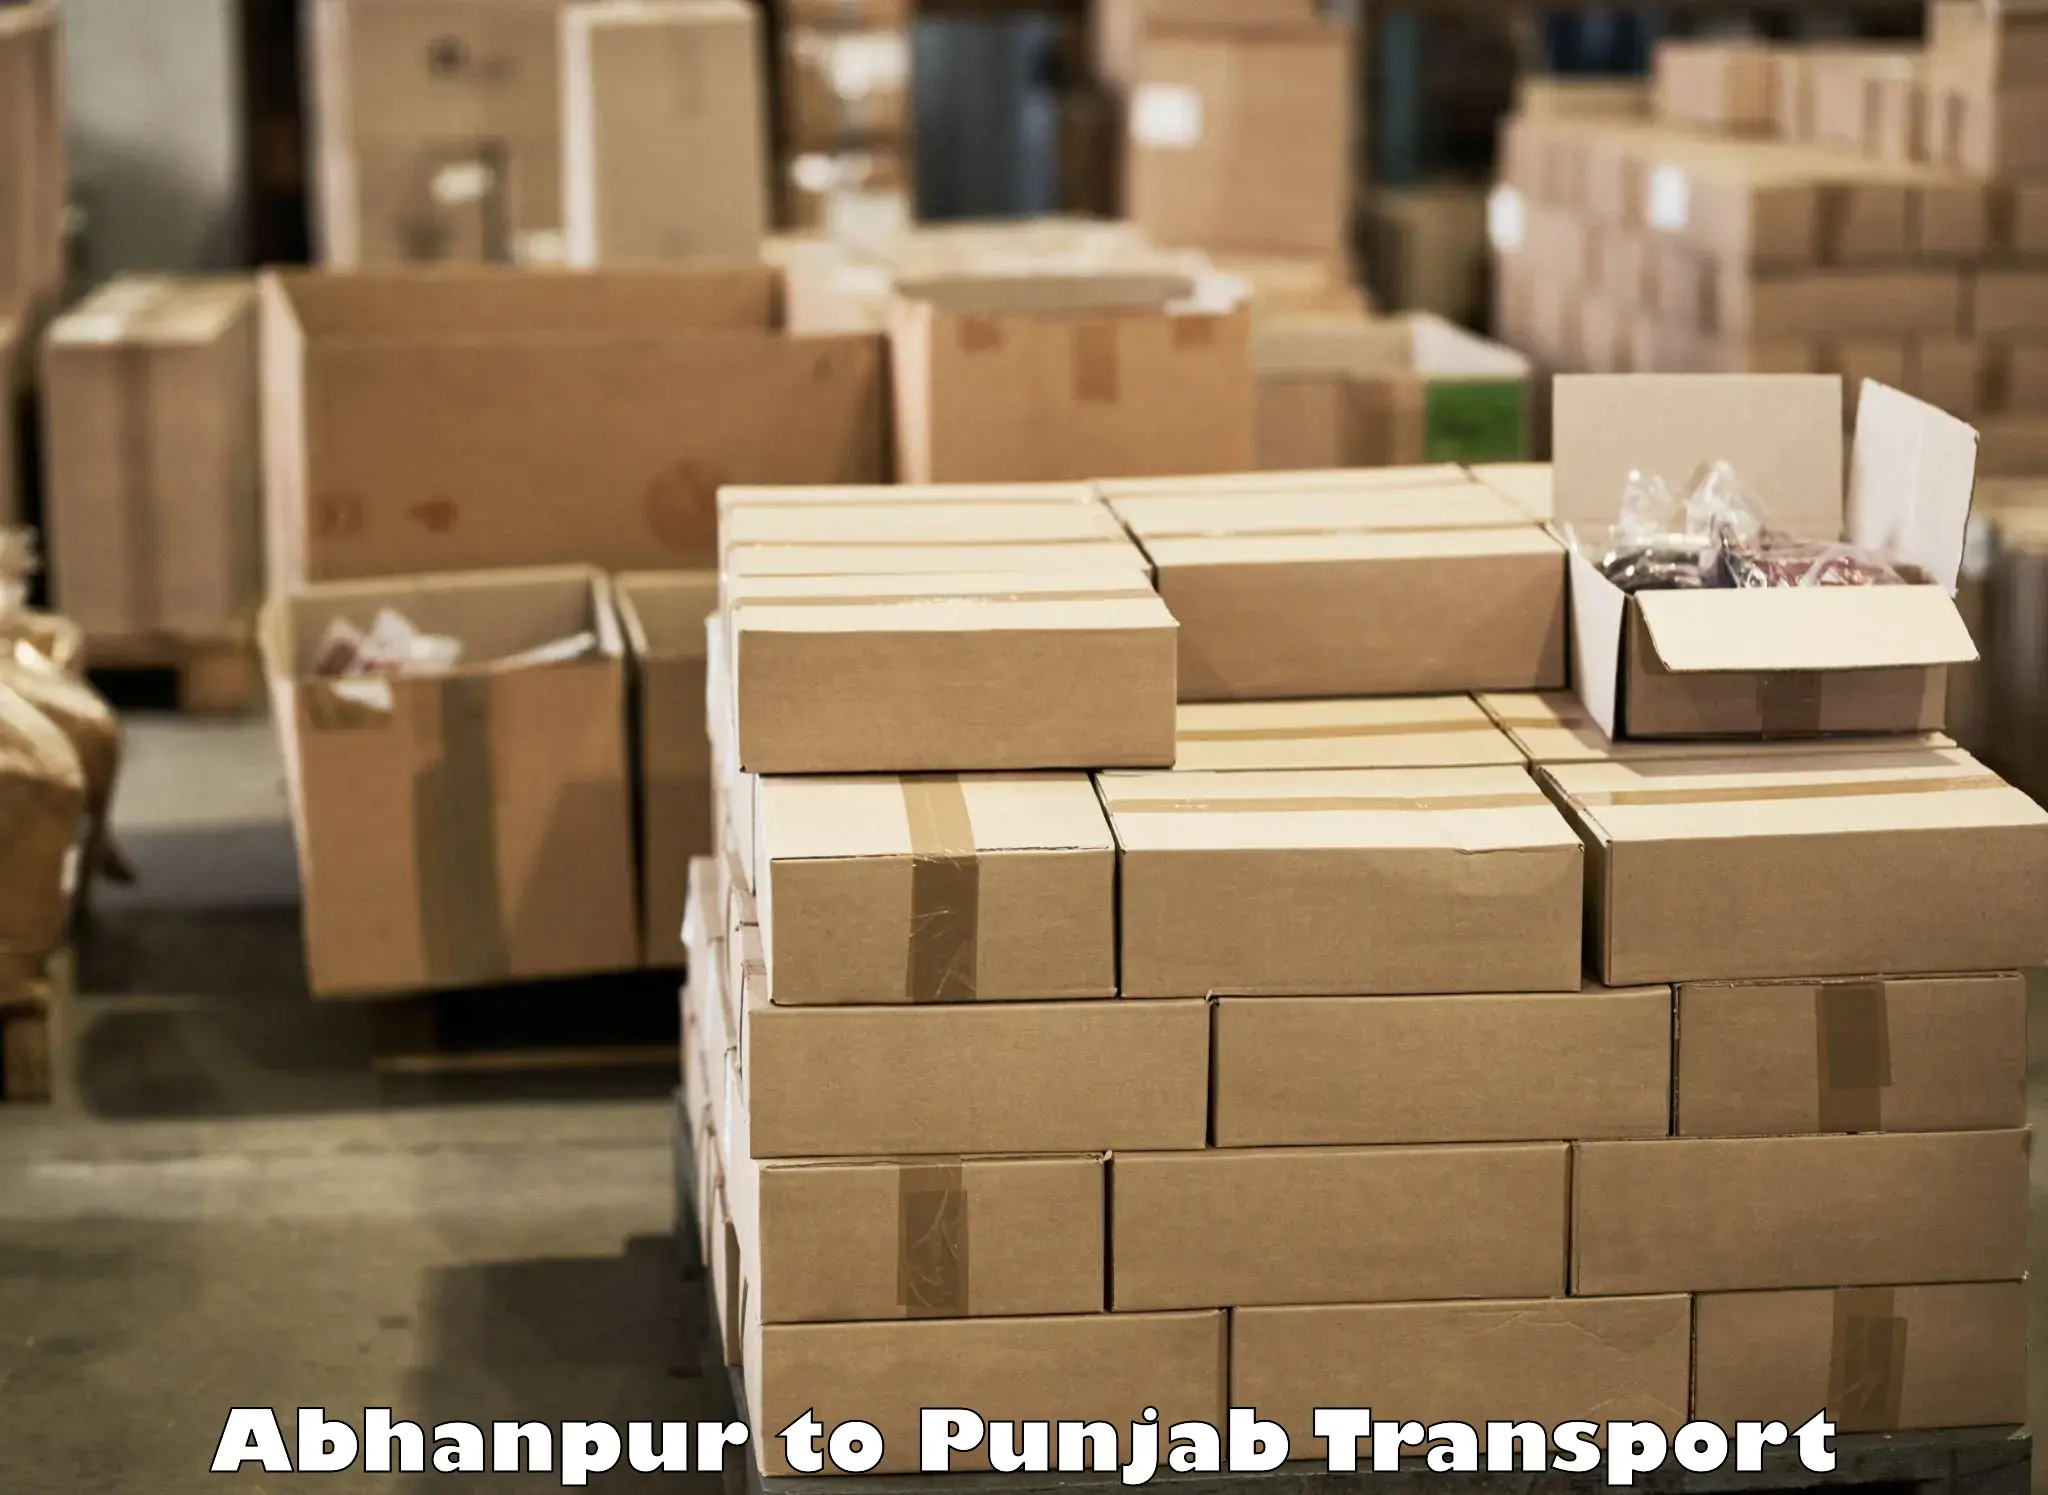 Pick up transport service Abhanpur to Batala